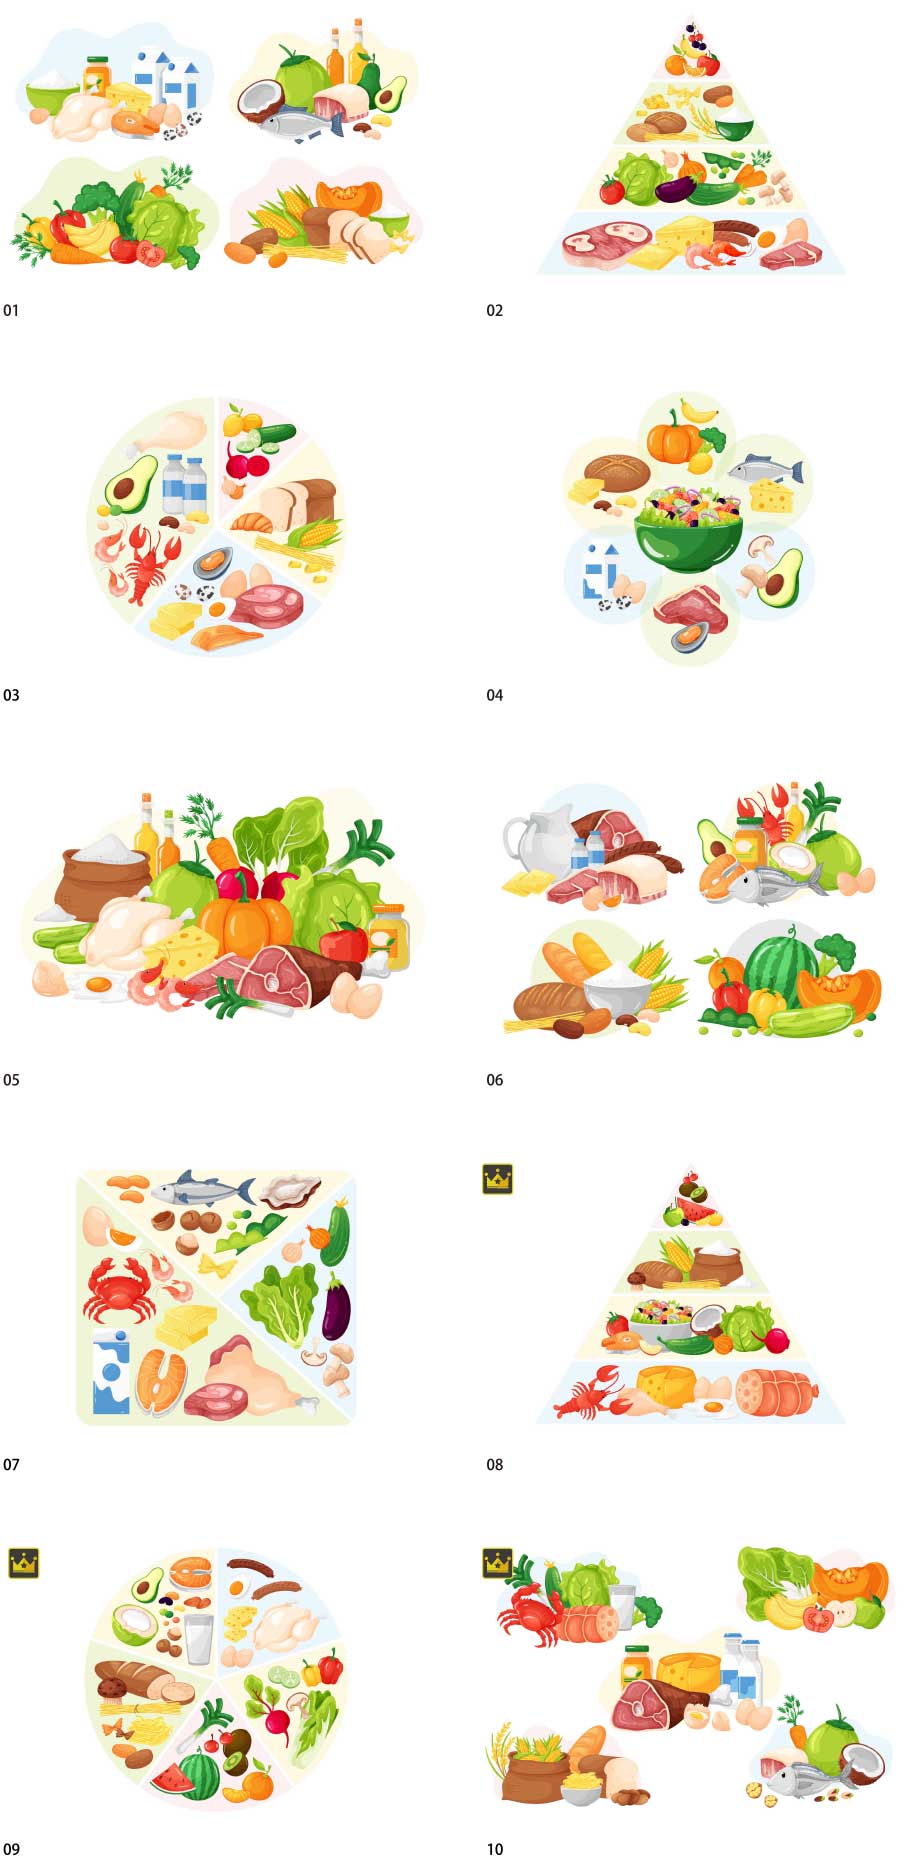 Rice nutrition illustration collection